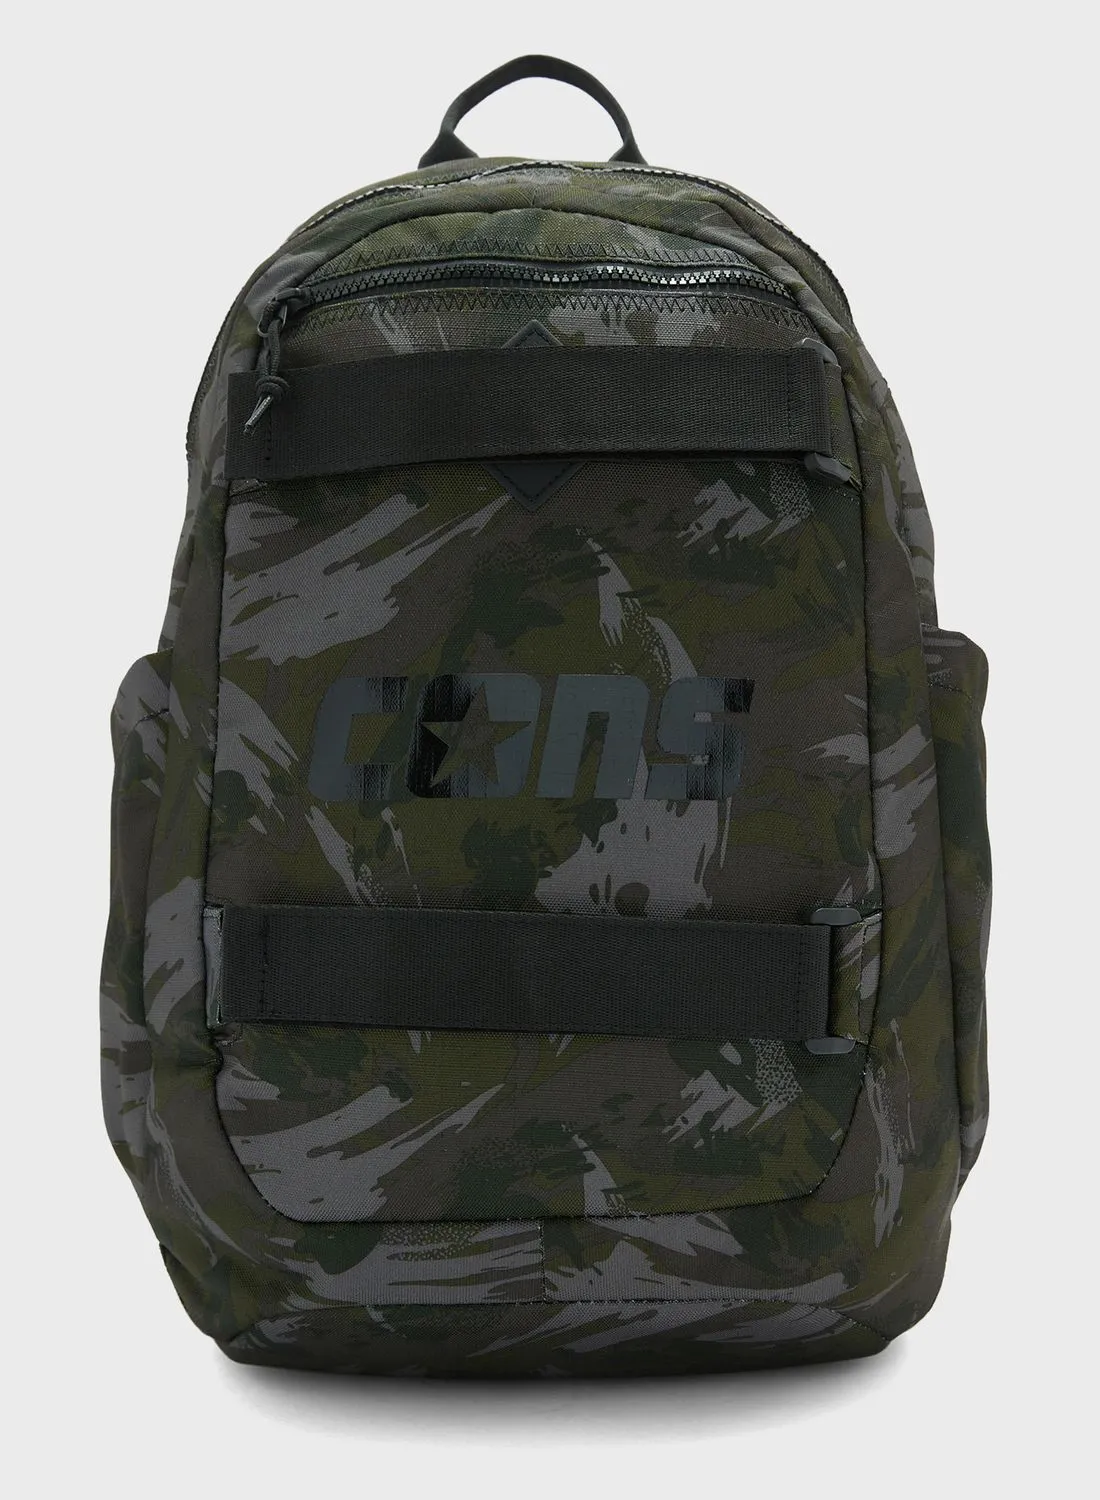 CONVERSE Paint Camo Cons Utility Backpack